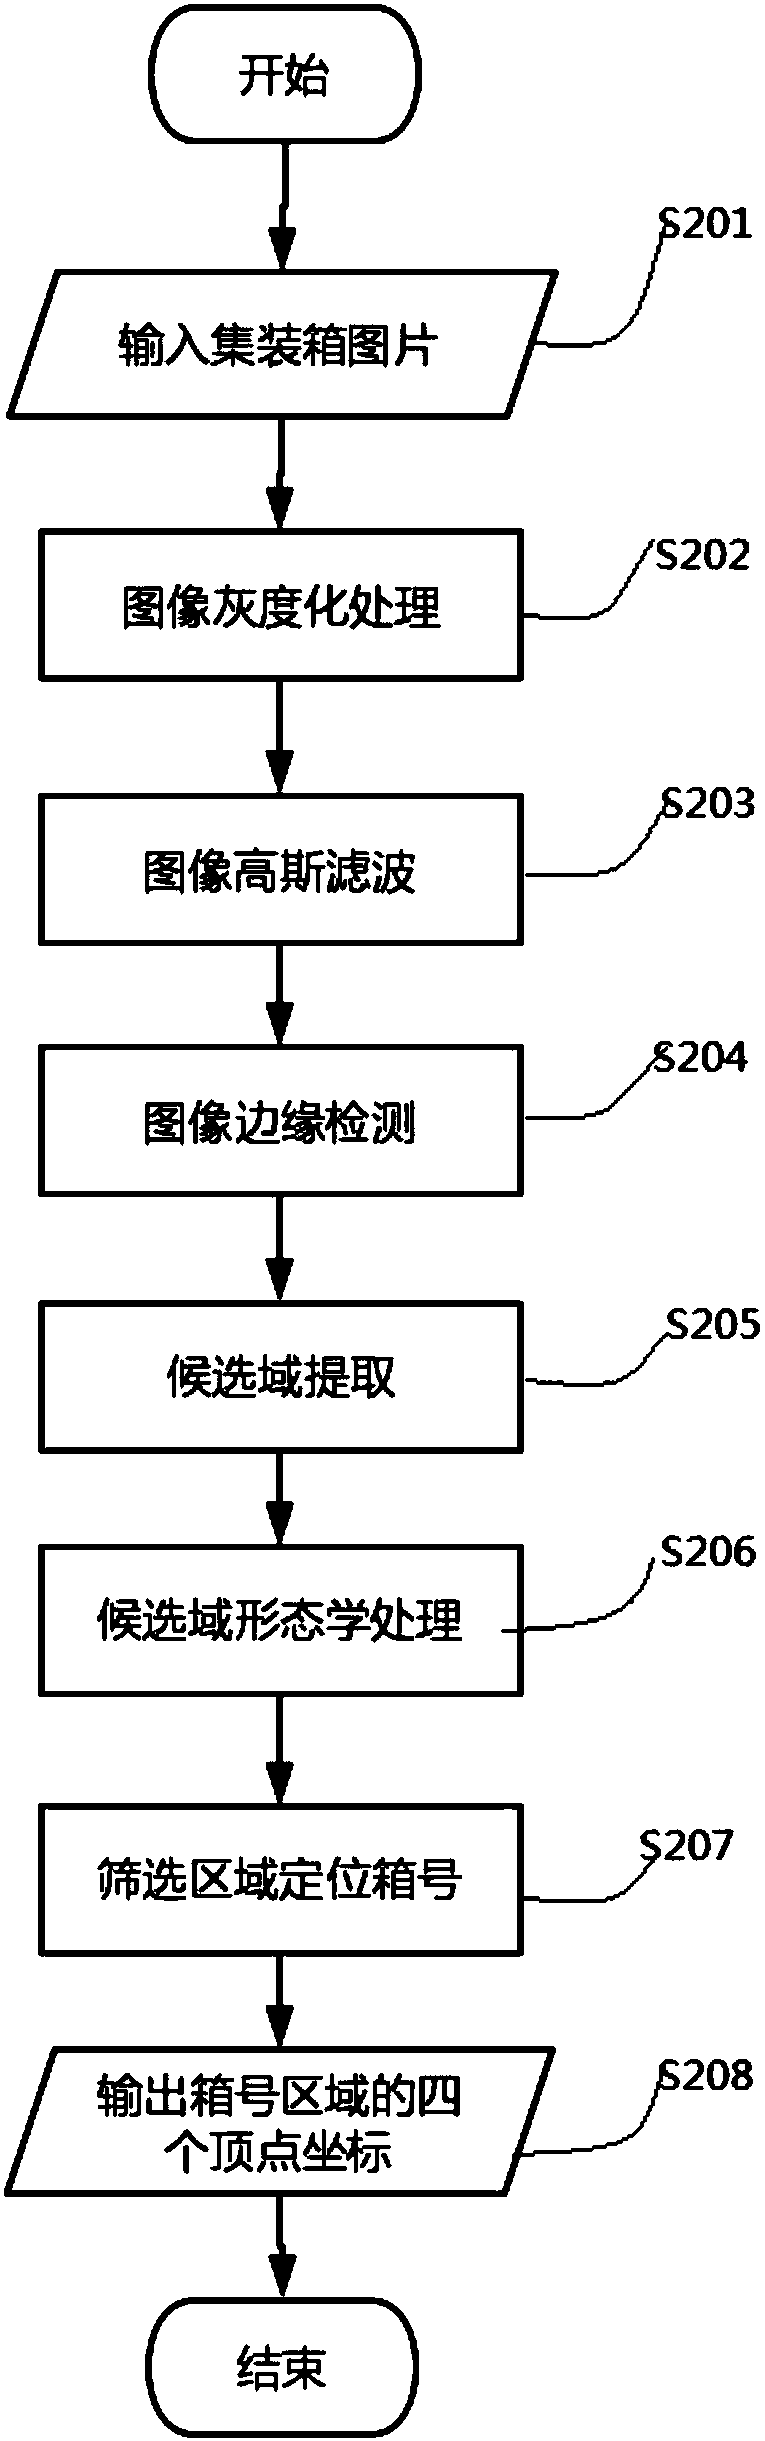 Convolutional neural network classification-based container number recognition method